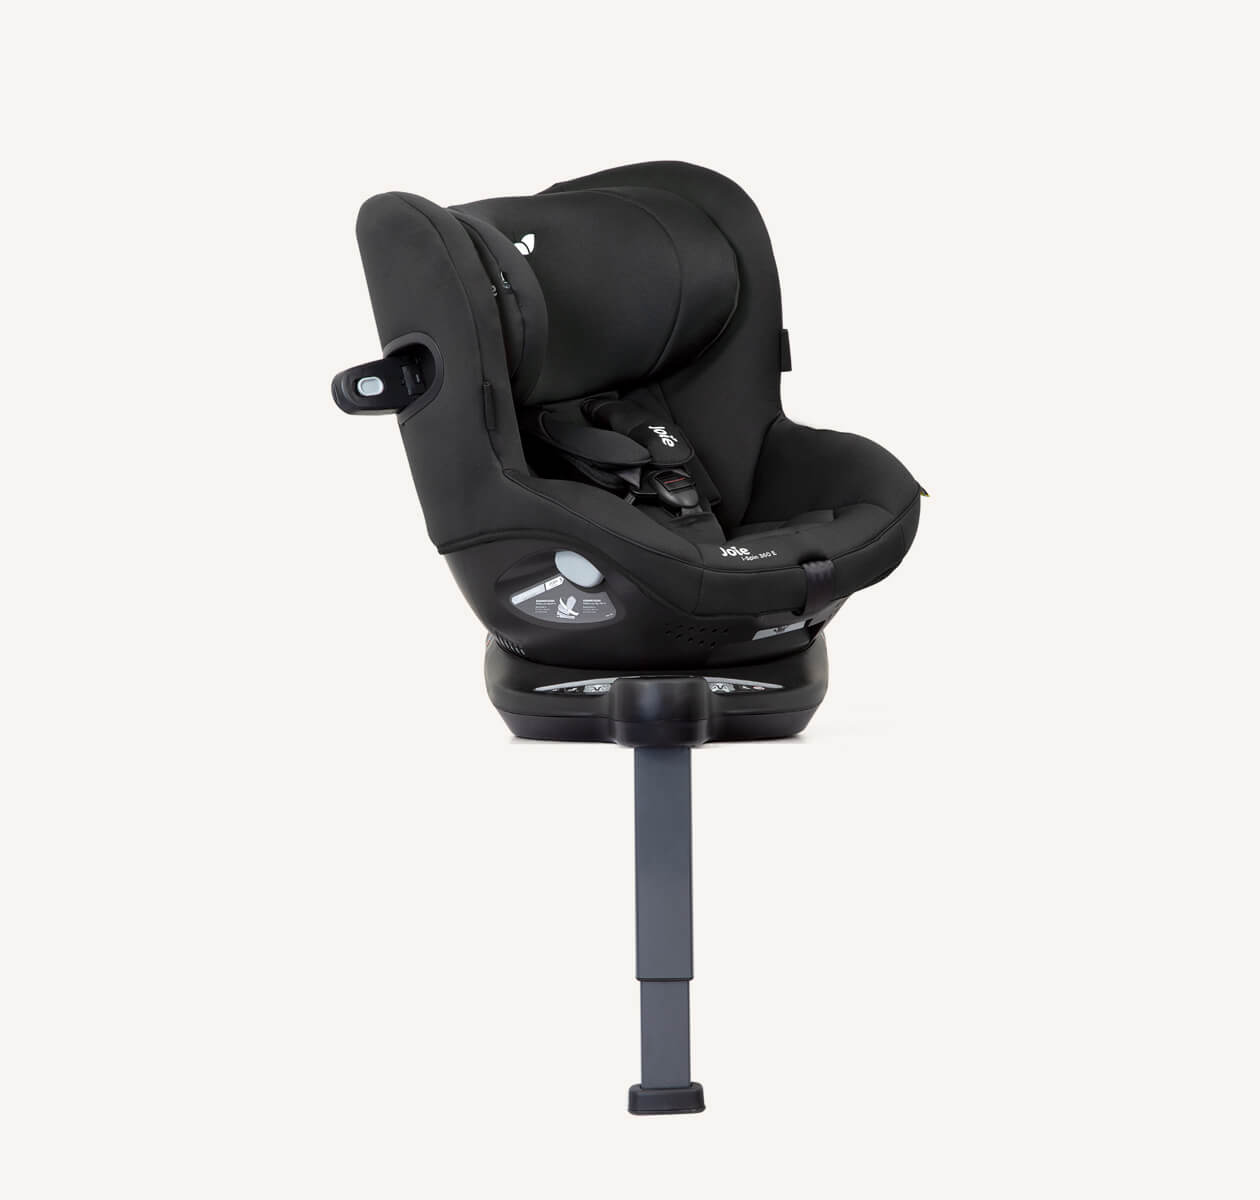 https://dd.joiebaby.com/media/catalog/product/p/1/p1-joie-spinning-car-seat-ispin360e-coal-right-angle-spin.jpg?type=product&height=265&width=265